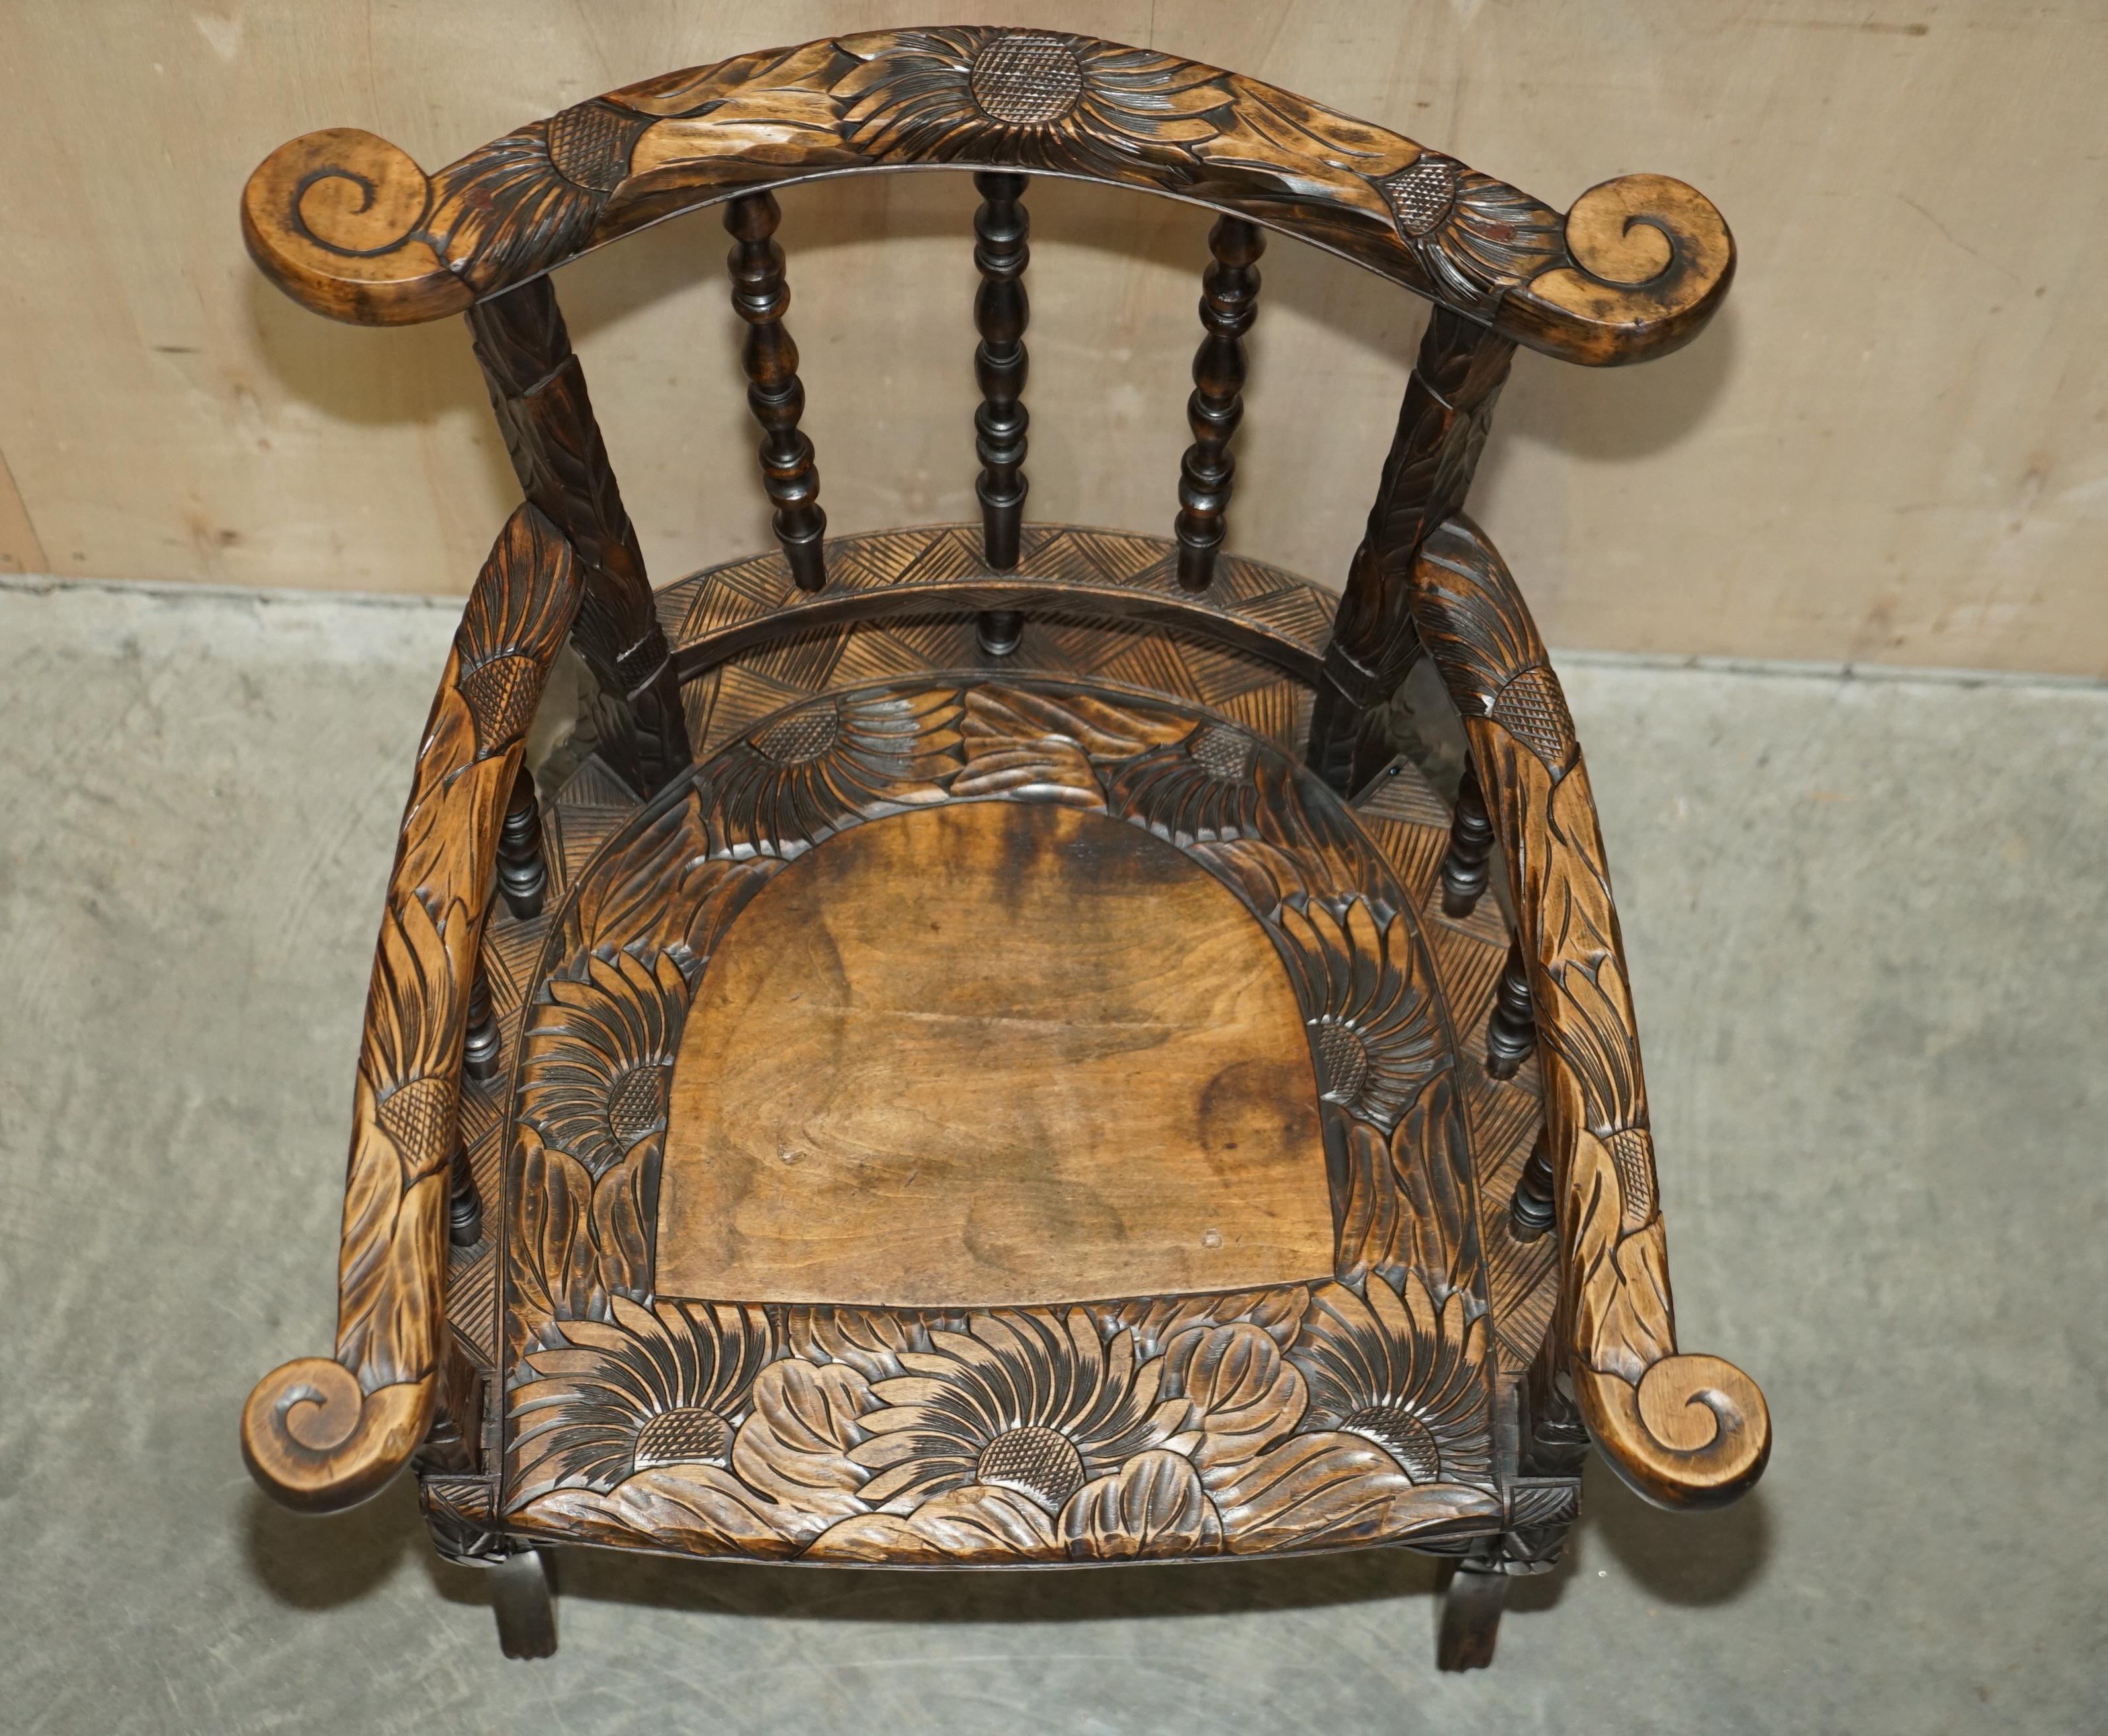 ORIGINAL ANTIQUE LIBERTY'S LONDON JAPANESE QING DYNASTY ARMCHAiR FLORAL CARVING For Sale 6